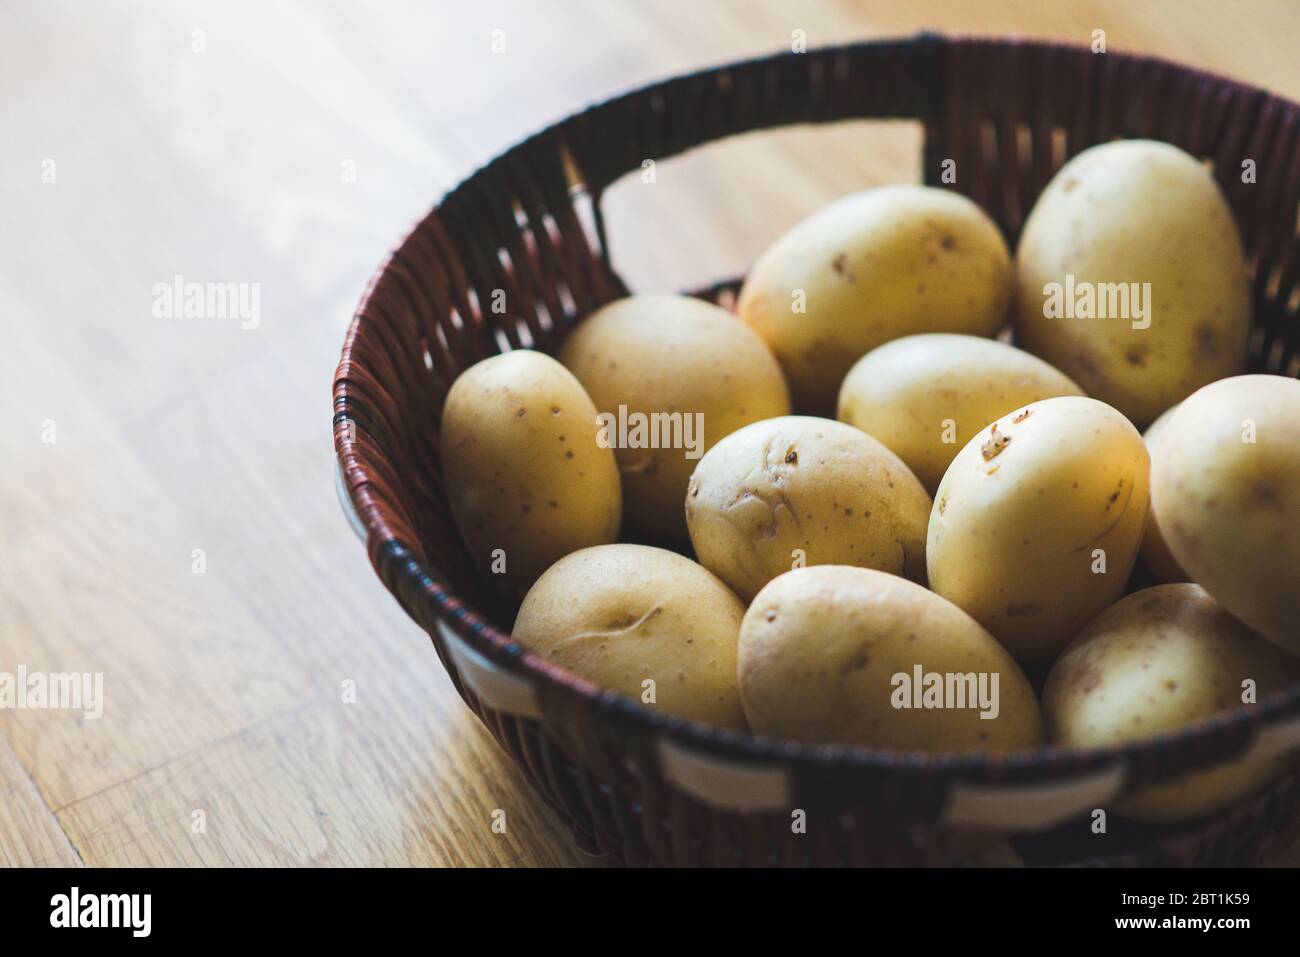 Potatoes in a wicker basket. Potato tubers in wicker dishes and scattered on the table. Potato harvest. Vegetables for a healthy diet. Stock Photo